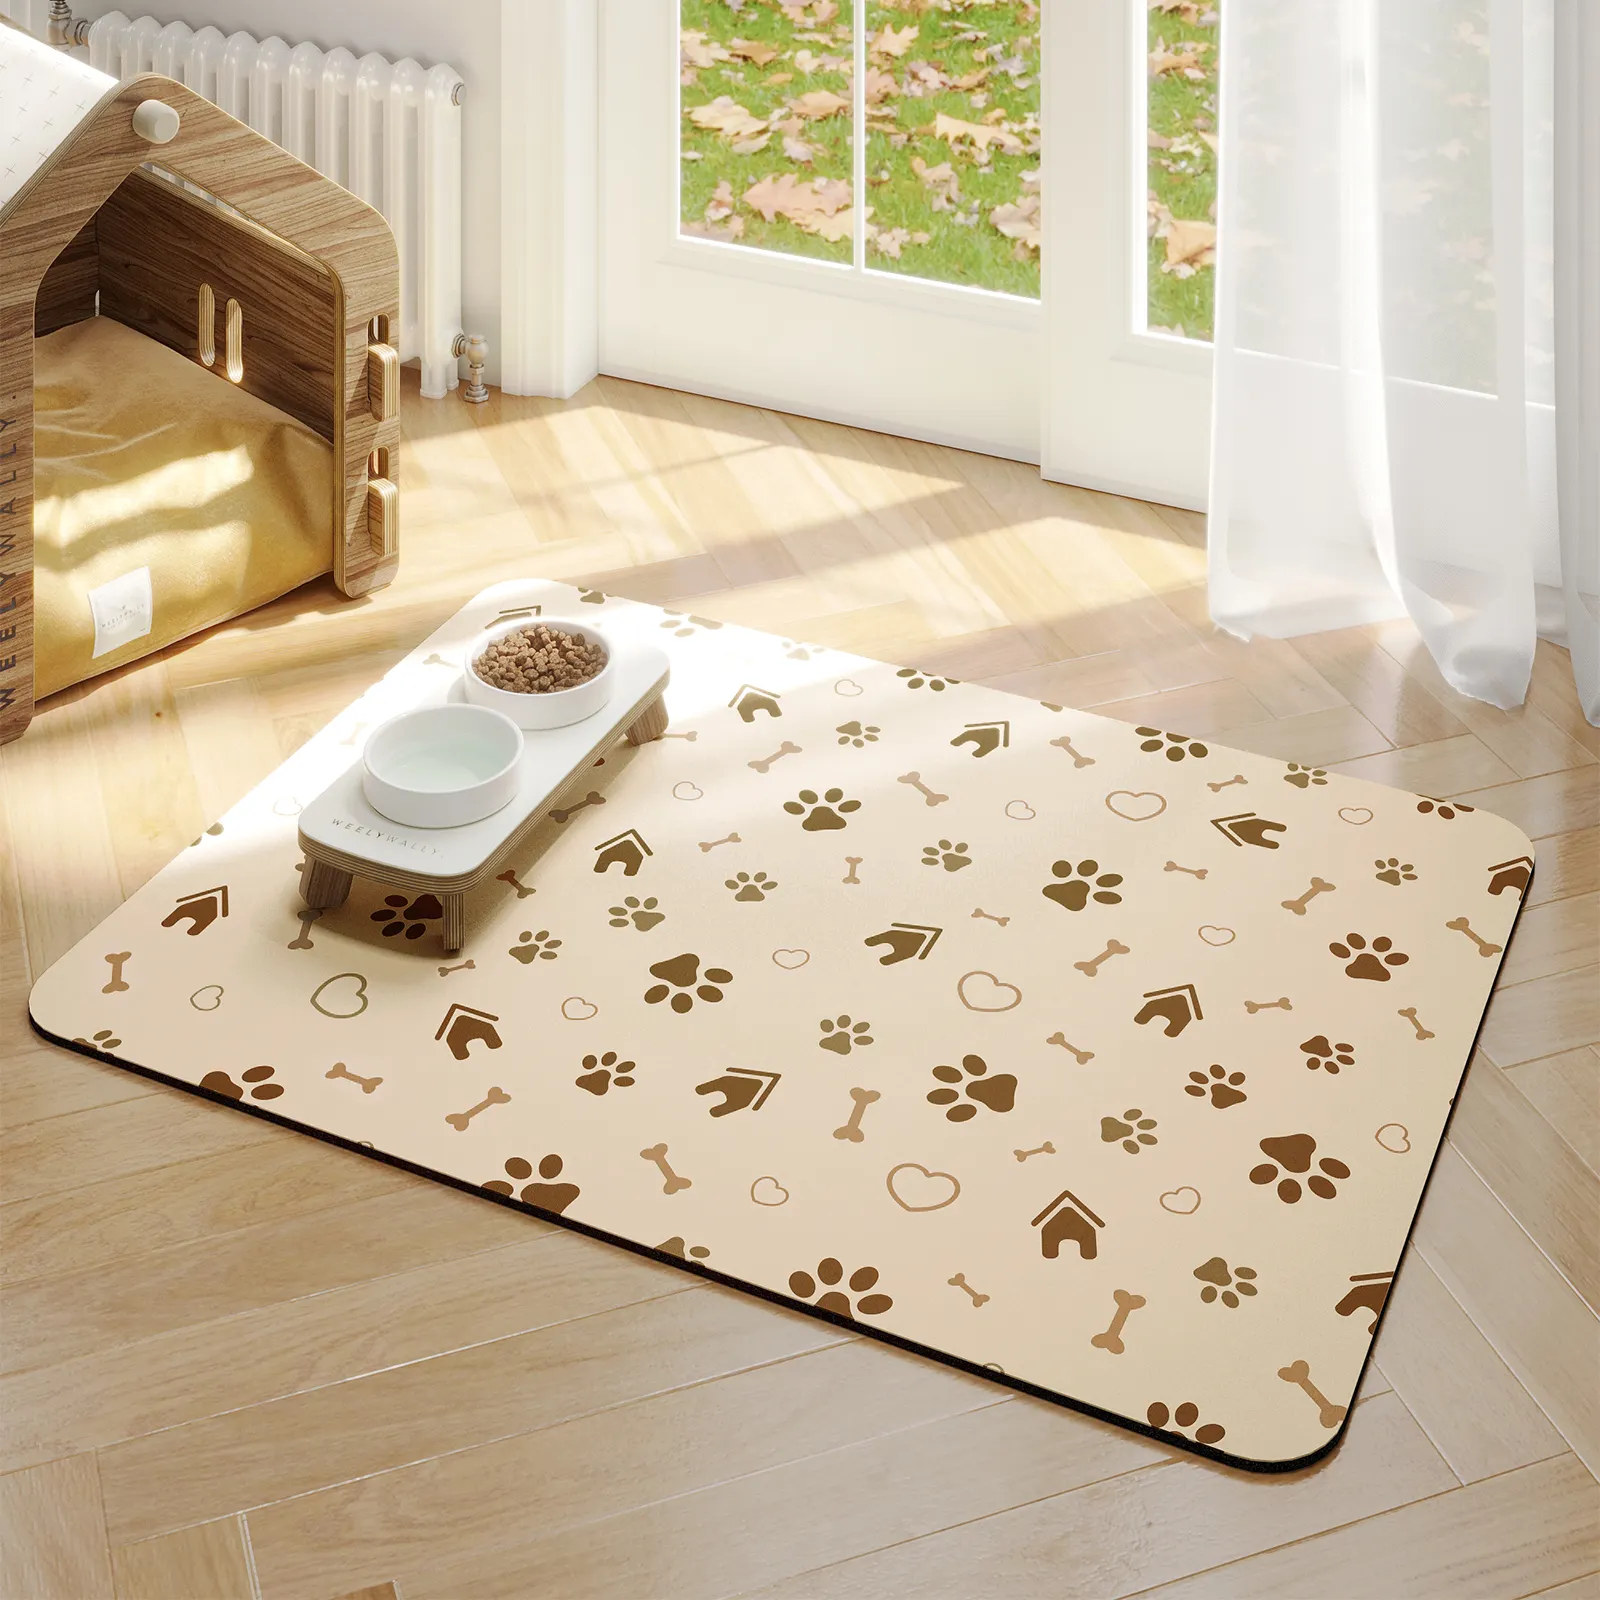 Pet friendly Antimicrobial stain Resistant Non-Slip Bowl Bed Kennel Sleeping dog Feeding pet pad mat for Small medium large dogs